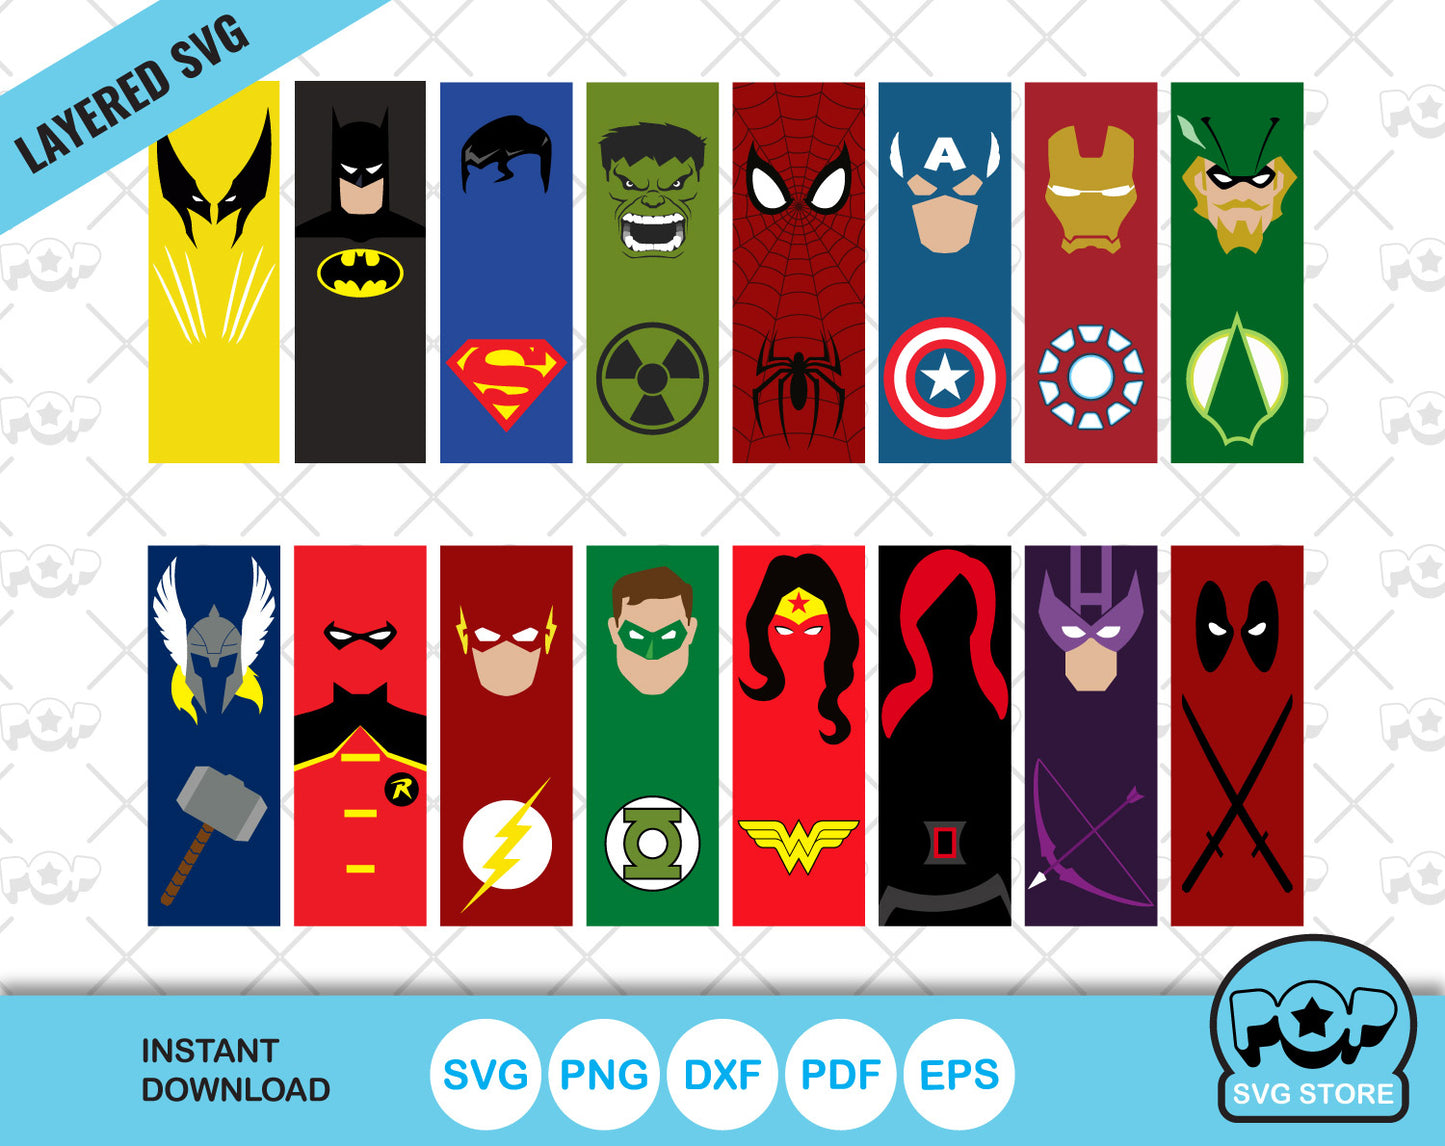 Superhero minimalist posters svg, Superhero posters svg bundle, Super Heroes SVG cutting files for cricut silhouette, PNG, DXF, instant DOWNLOAD